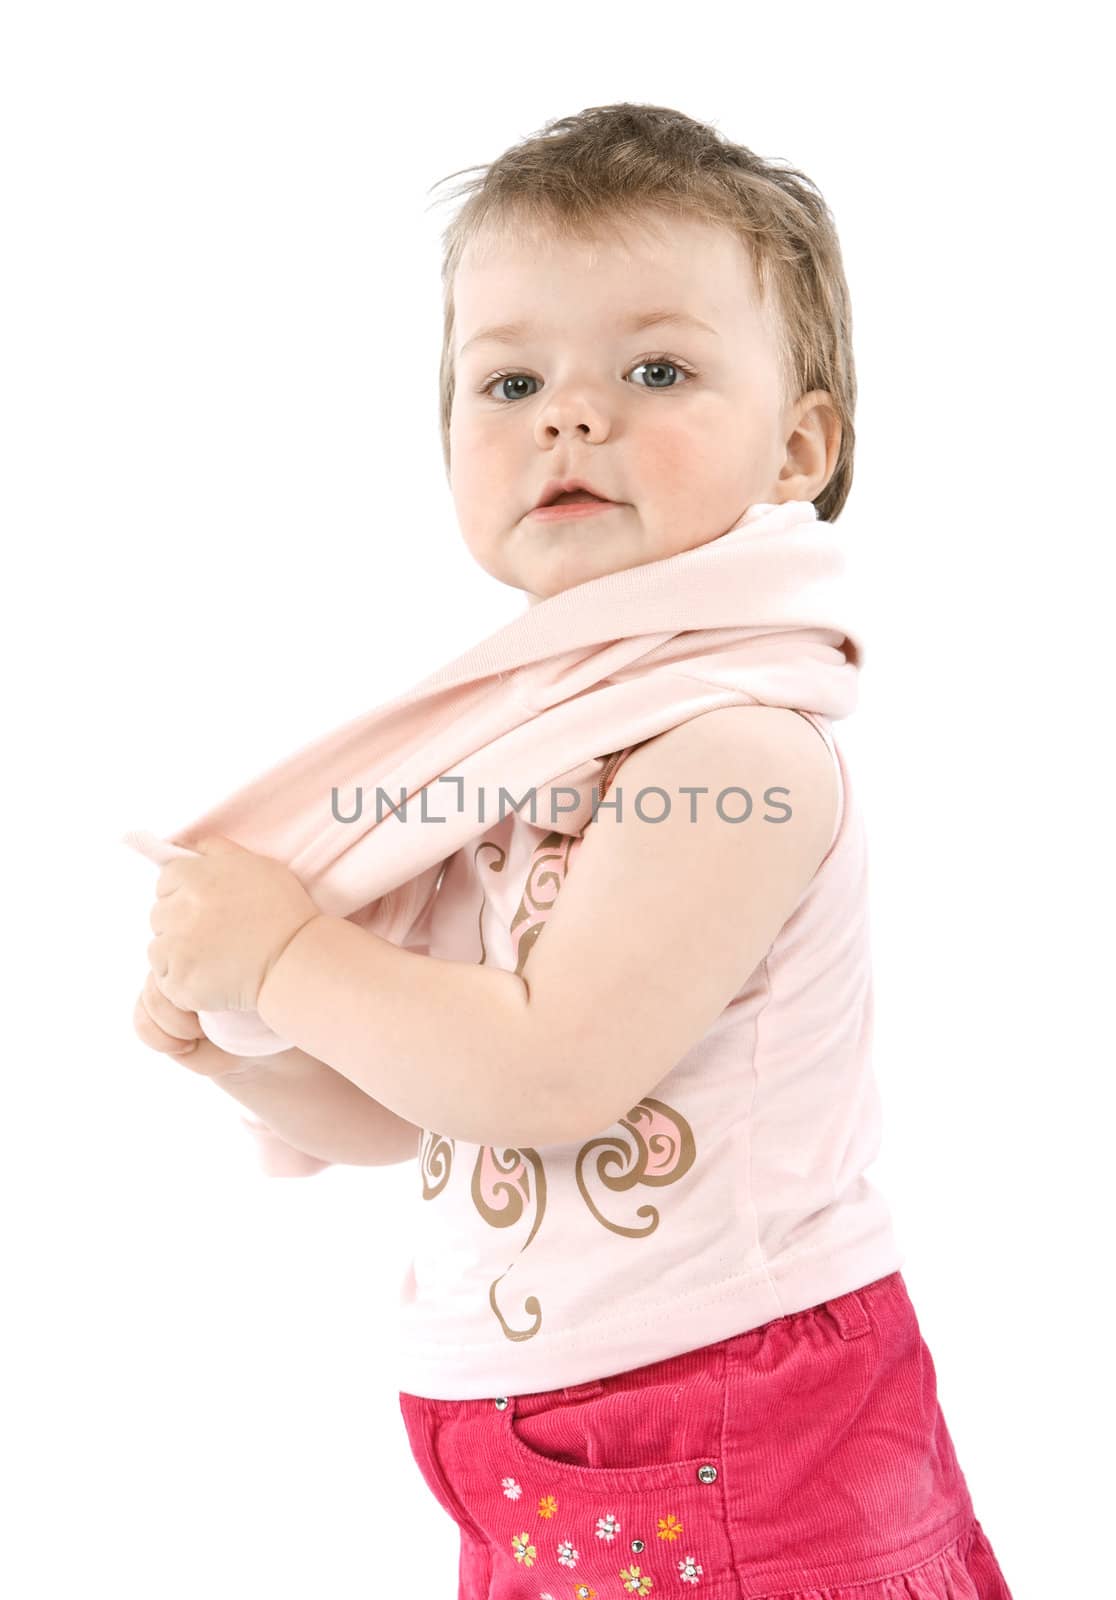 Child with pink jacket. Isolated on white